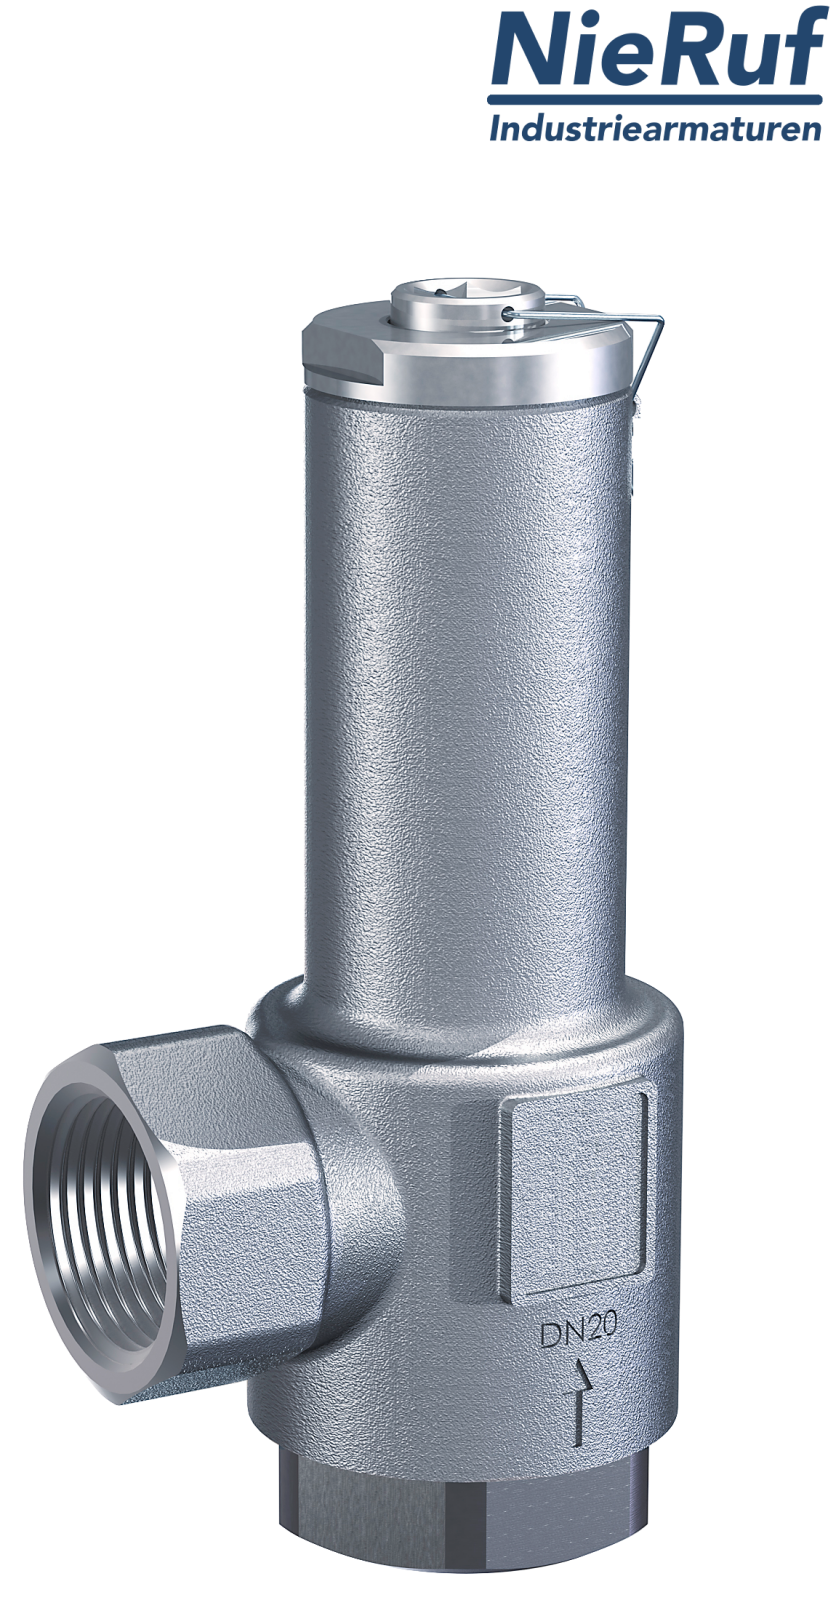 angle-type overflow valve 1 1/4" inch fm UV04 stainless steel AISI 316L 2 - 12 bar